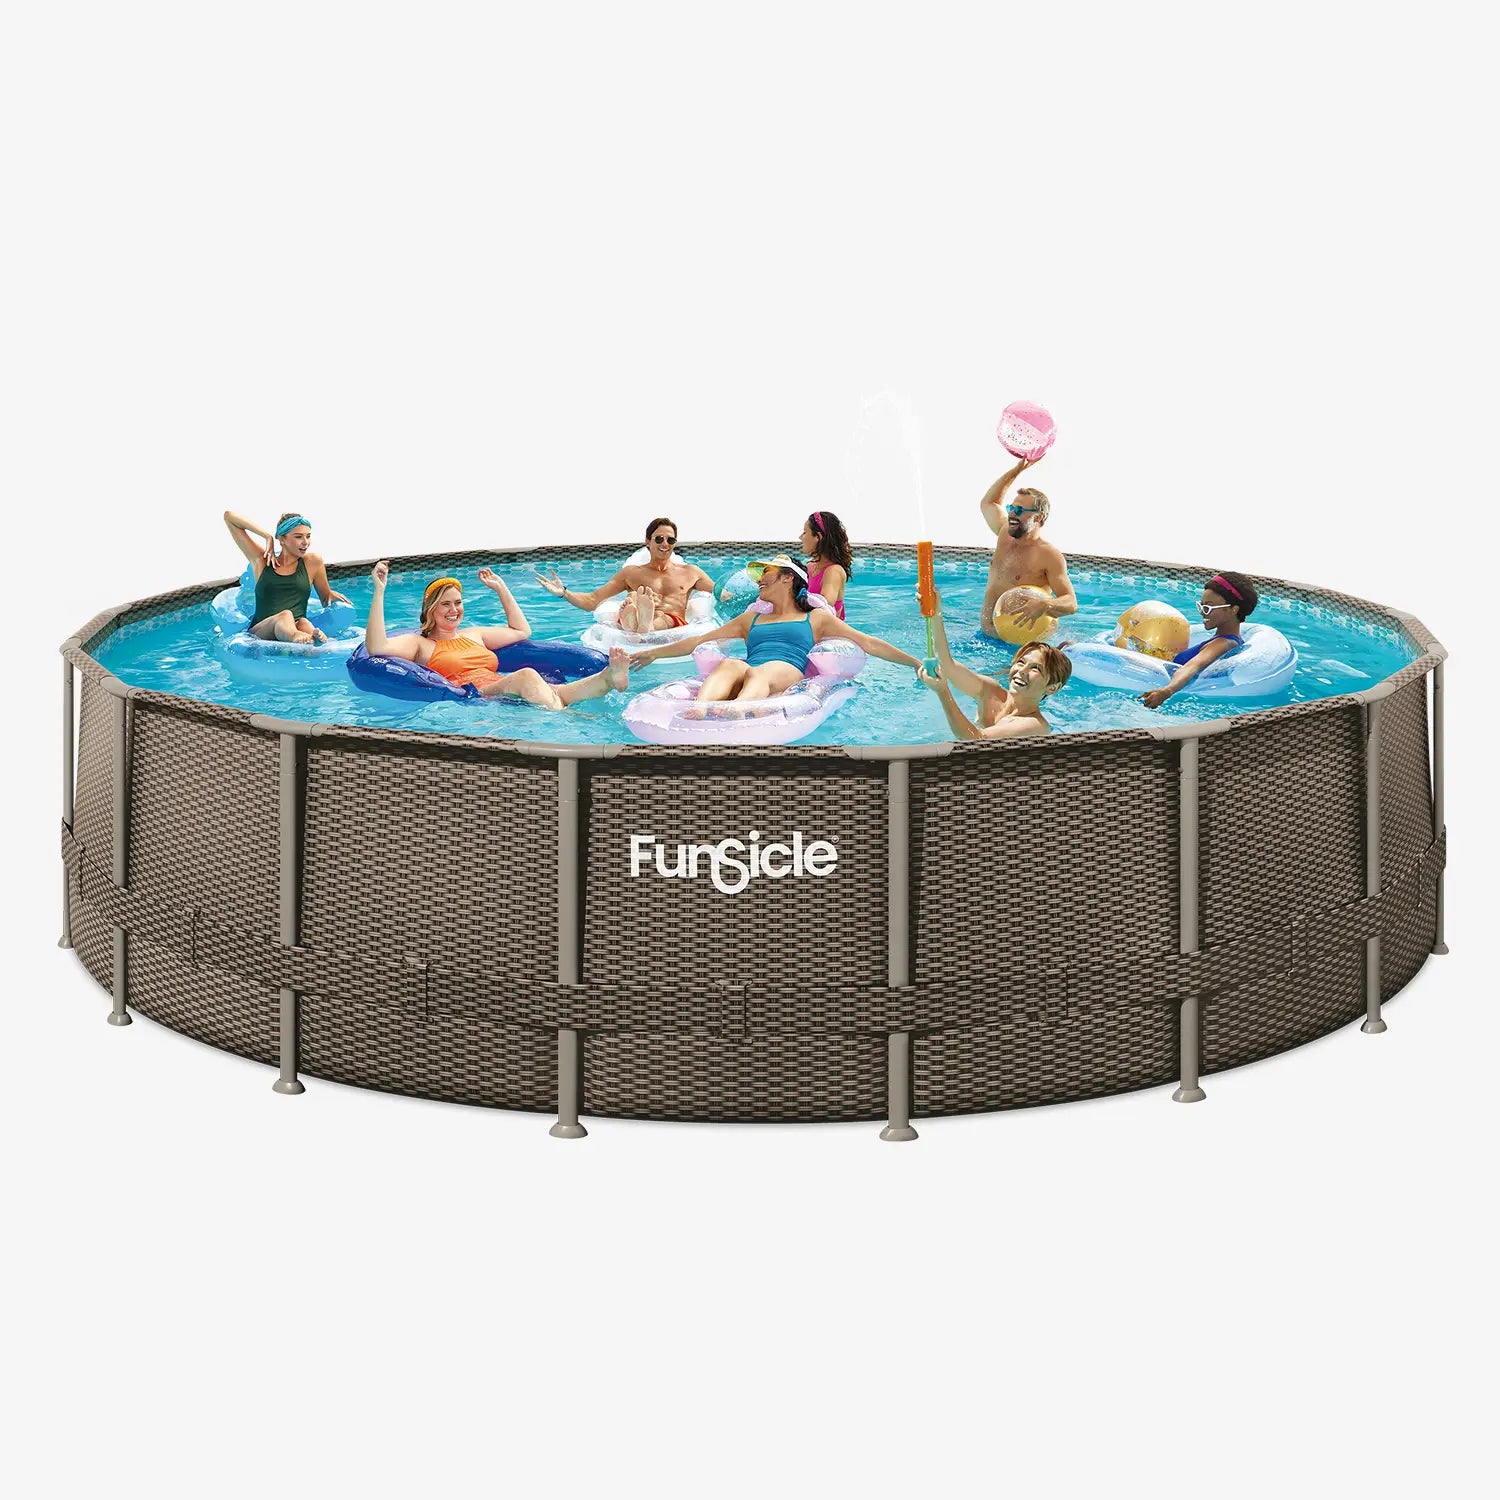 Funsicle 18 ft Oasis Designer Pool - Dark Double Rattan with people